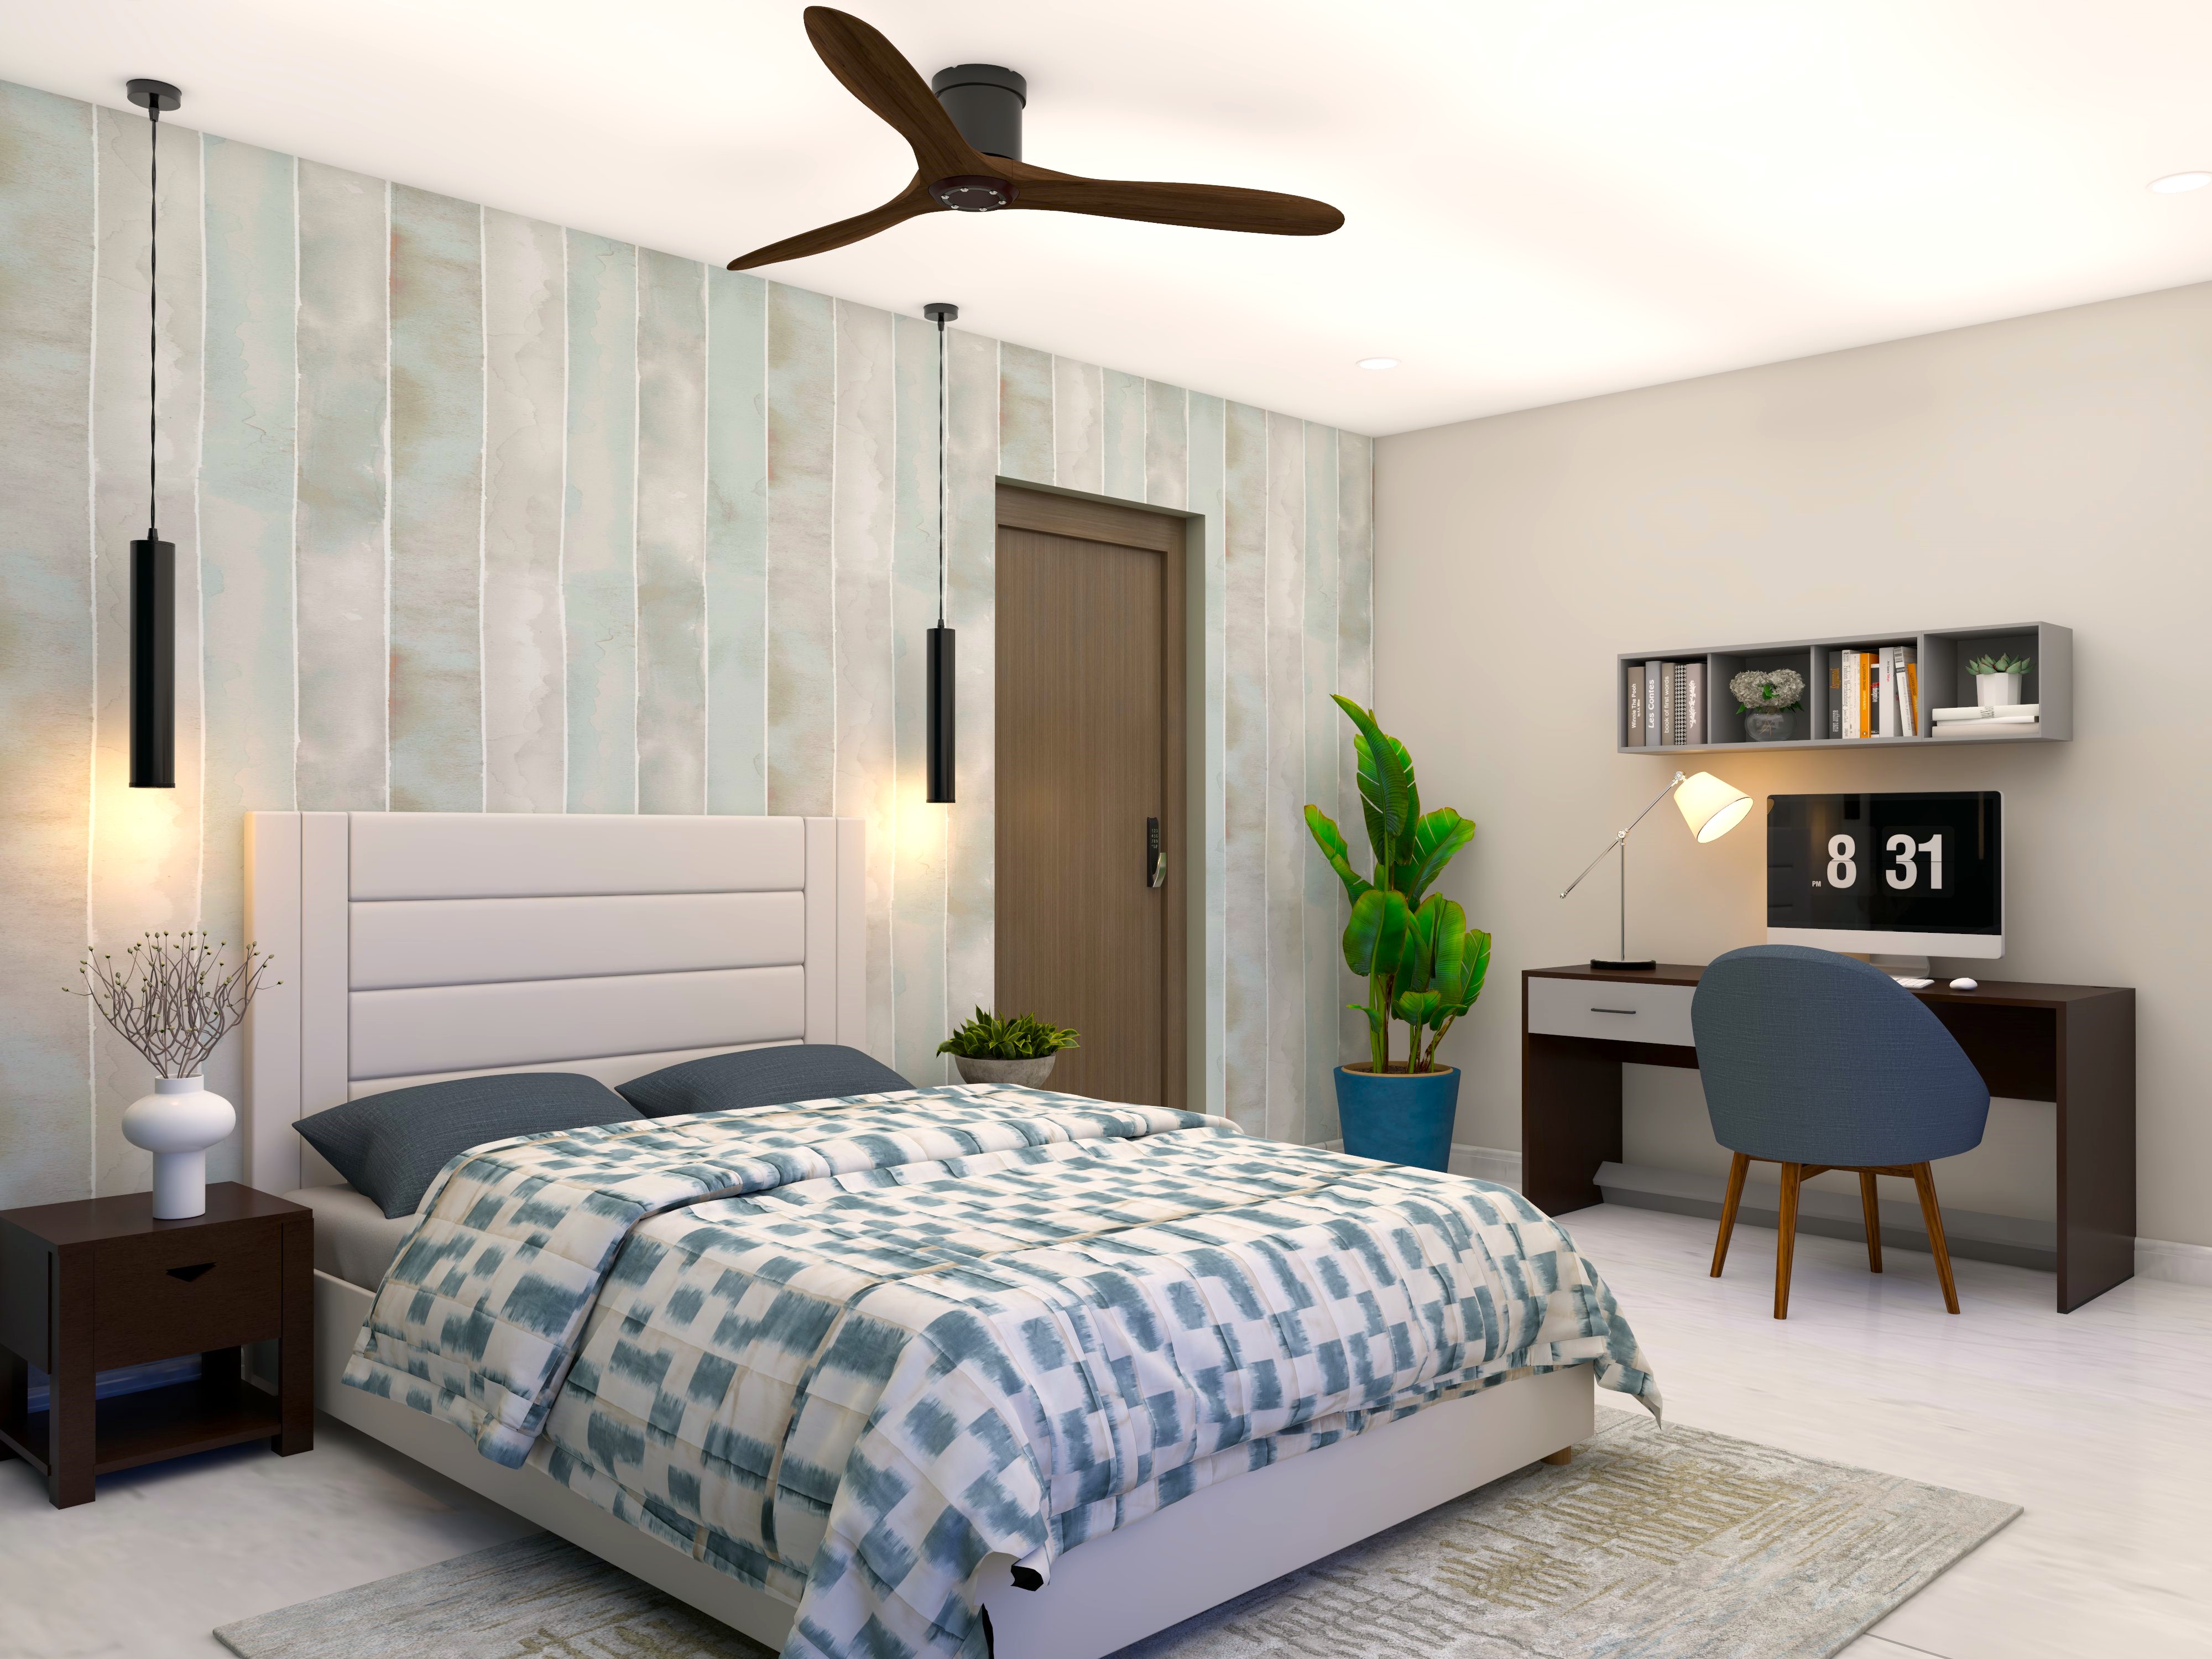 Bedroom with wallpaper and study unit-Beautiful Homes